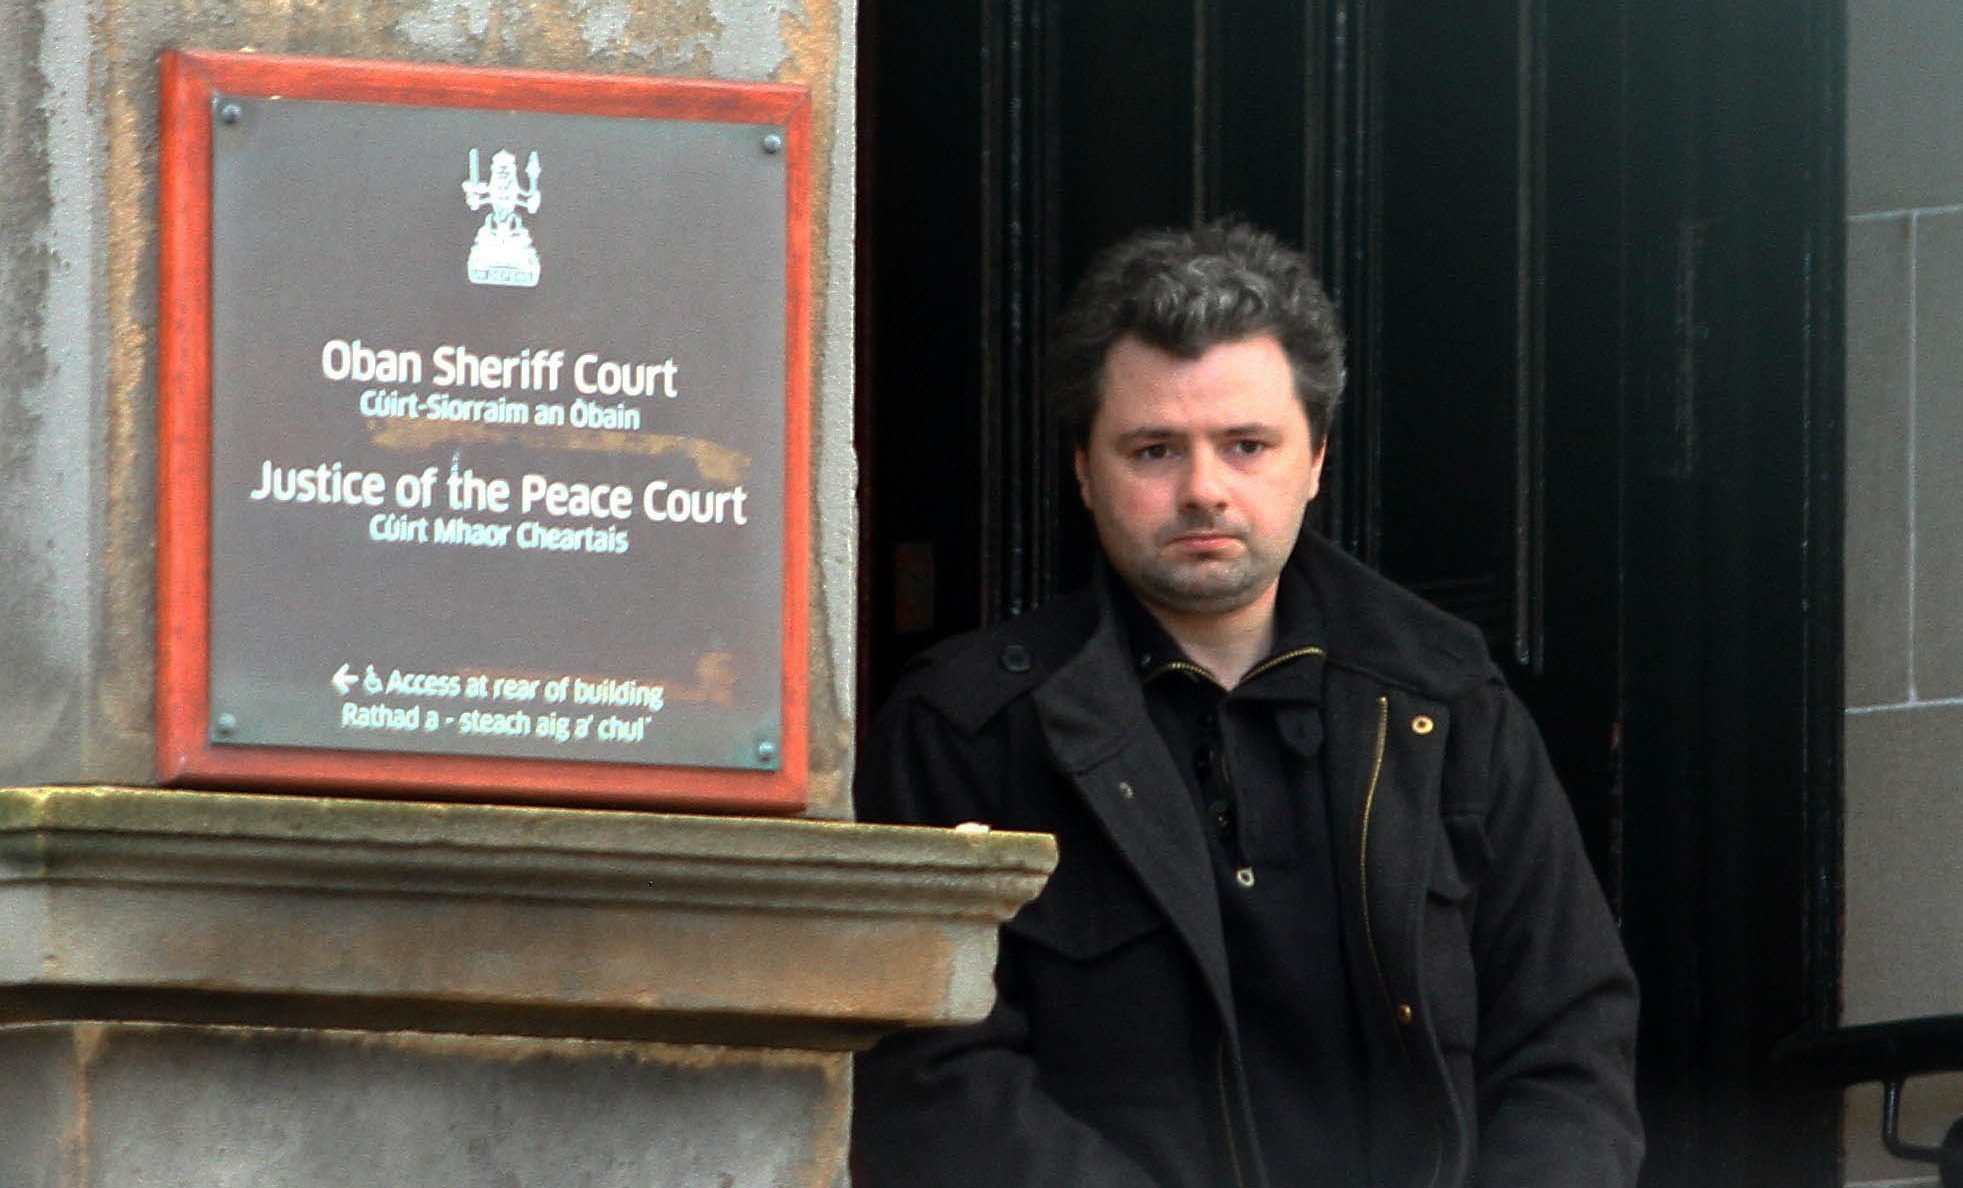 LIAM MARTIN WHO PLEAD GUILTY HAVING INDECENT IMAGES OF CHILDREN ON COMPUTER OBAN SHERIFF COURT OBAN PIC KEVIN MCGLYNN